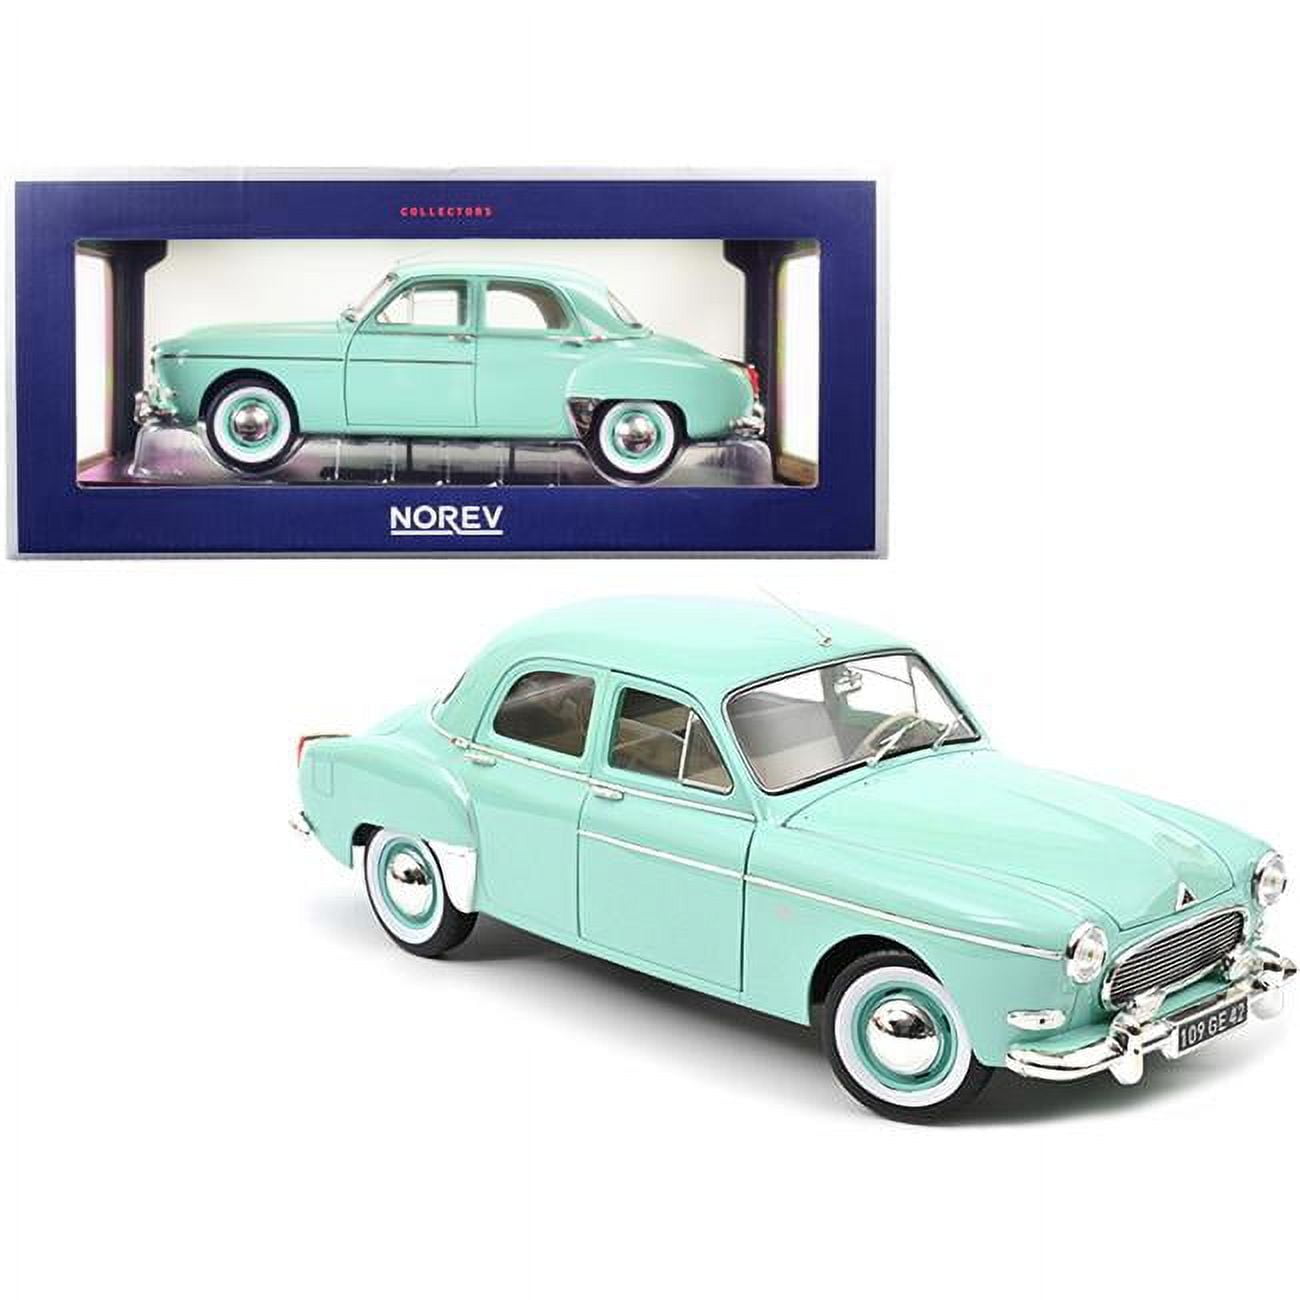 Picture of Norev 185283 1959 Renault Fregate Erin Green 1-18 Scale Diecast Model Car